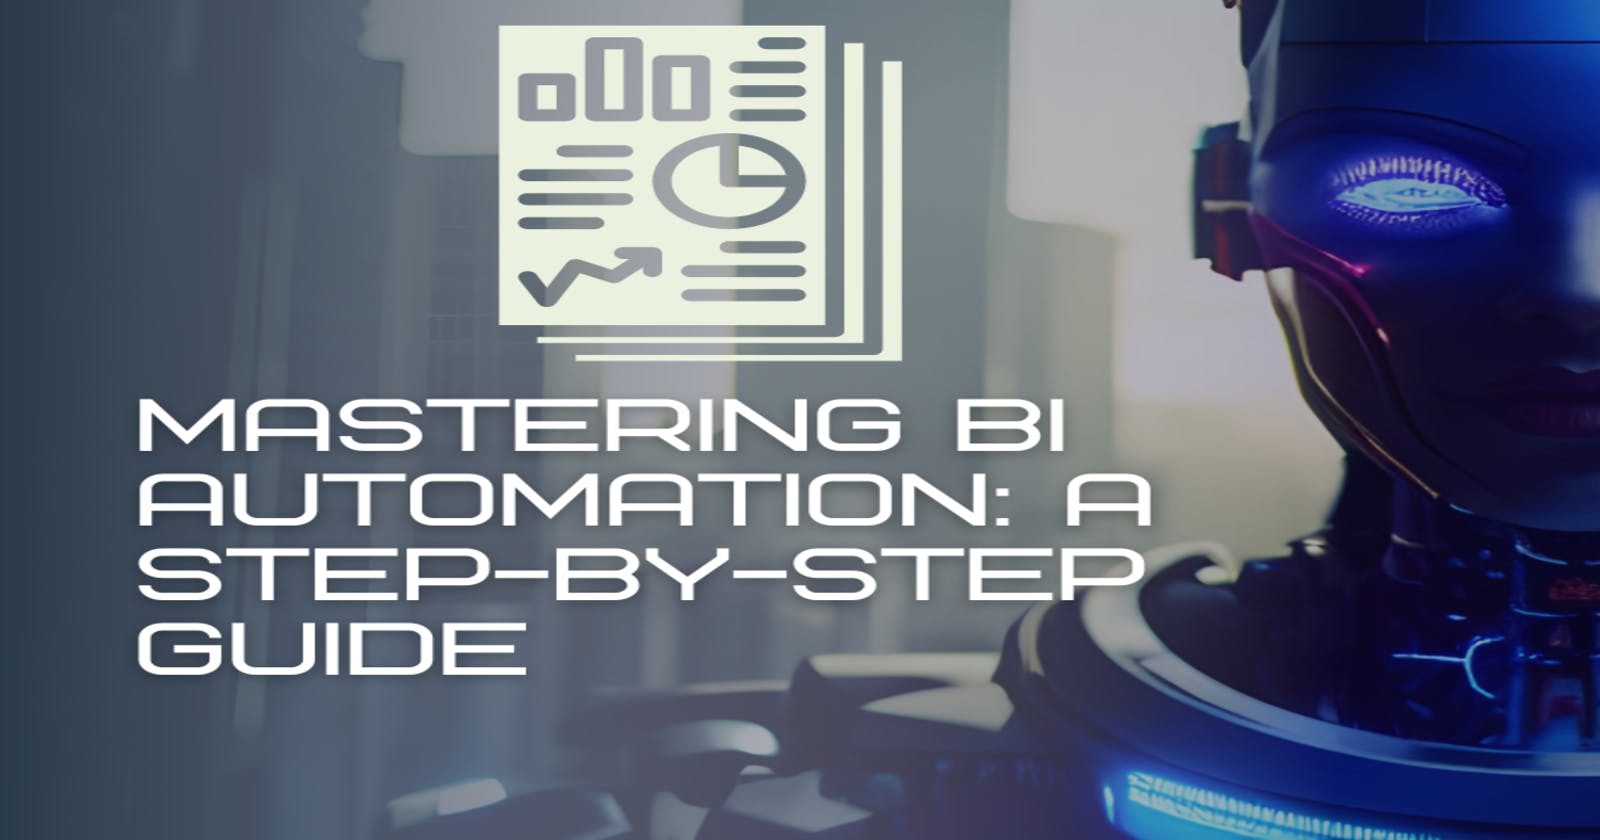 Mastering BI Automation: A Step-by-Step Guide